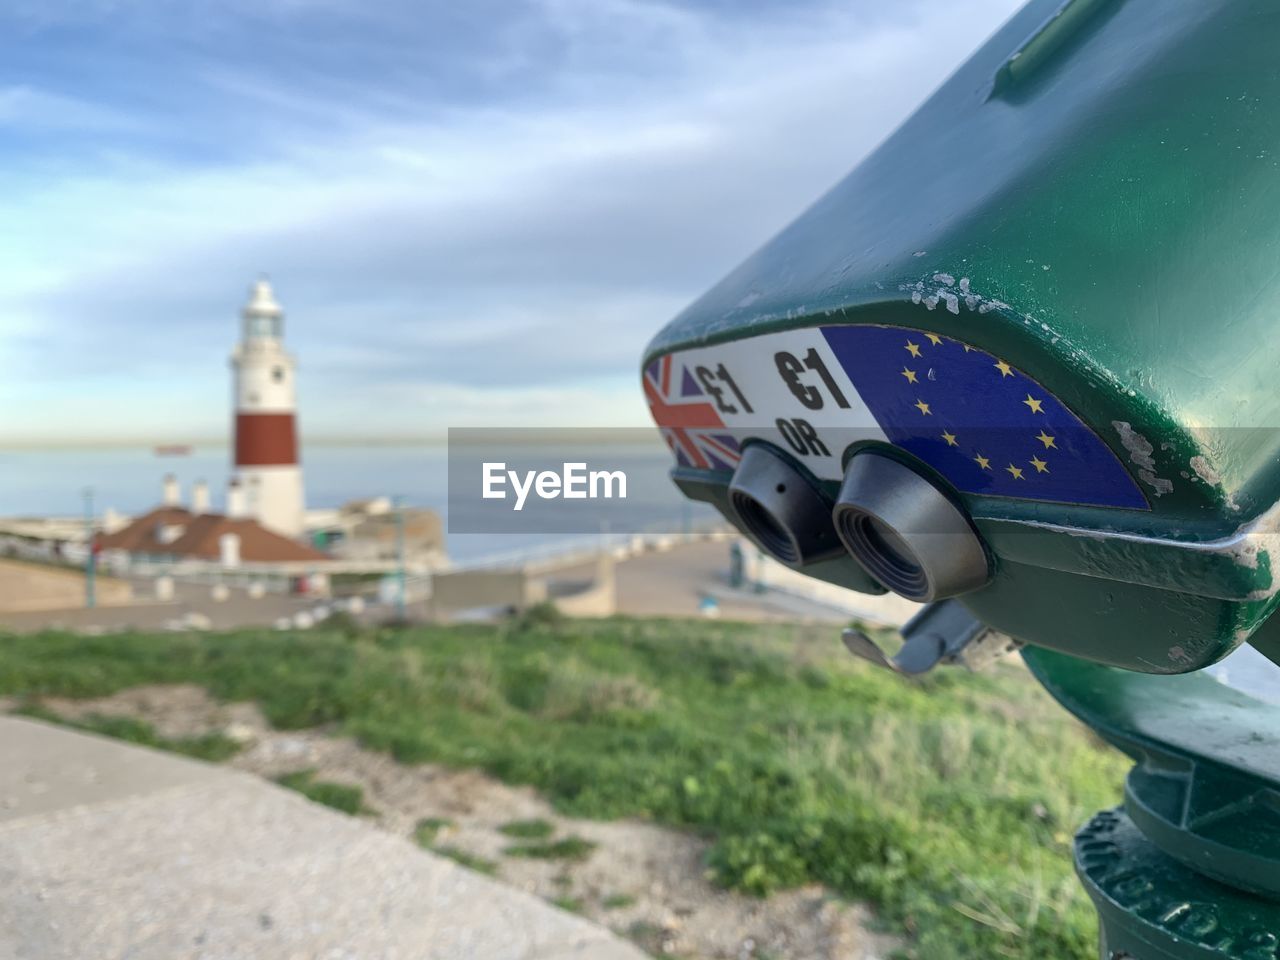 Binoculars and europa point lighthouse with european and british flags